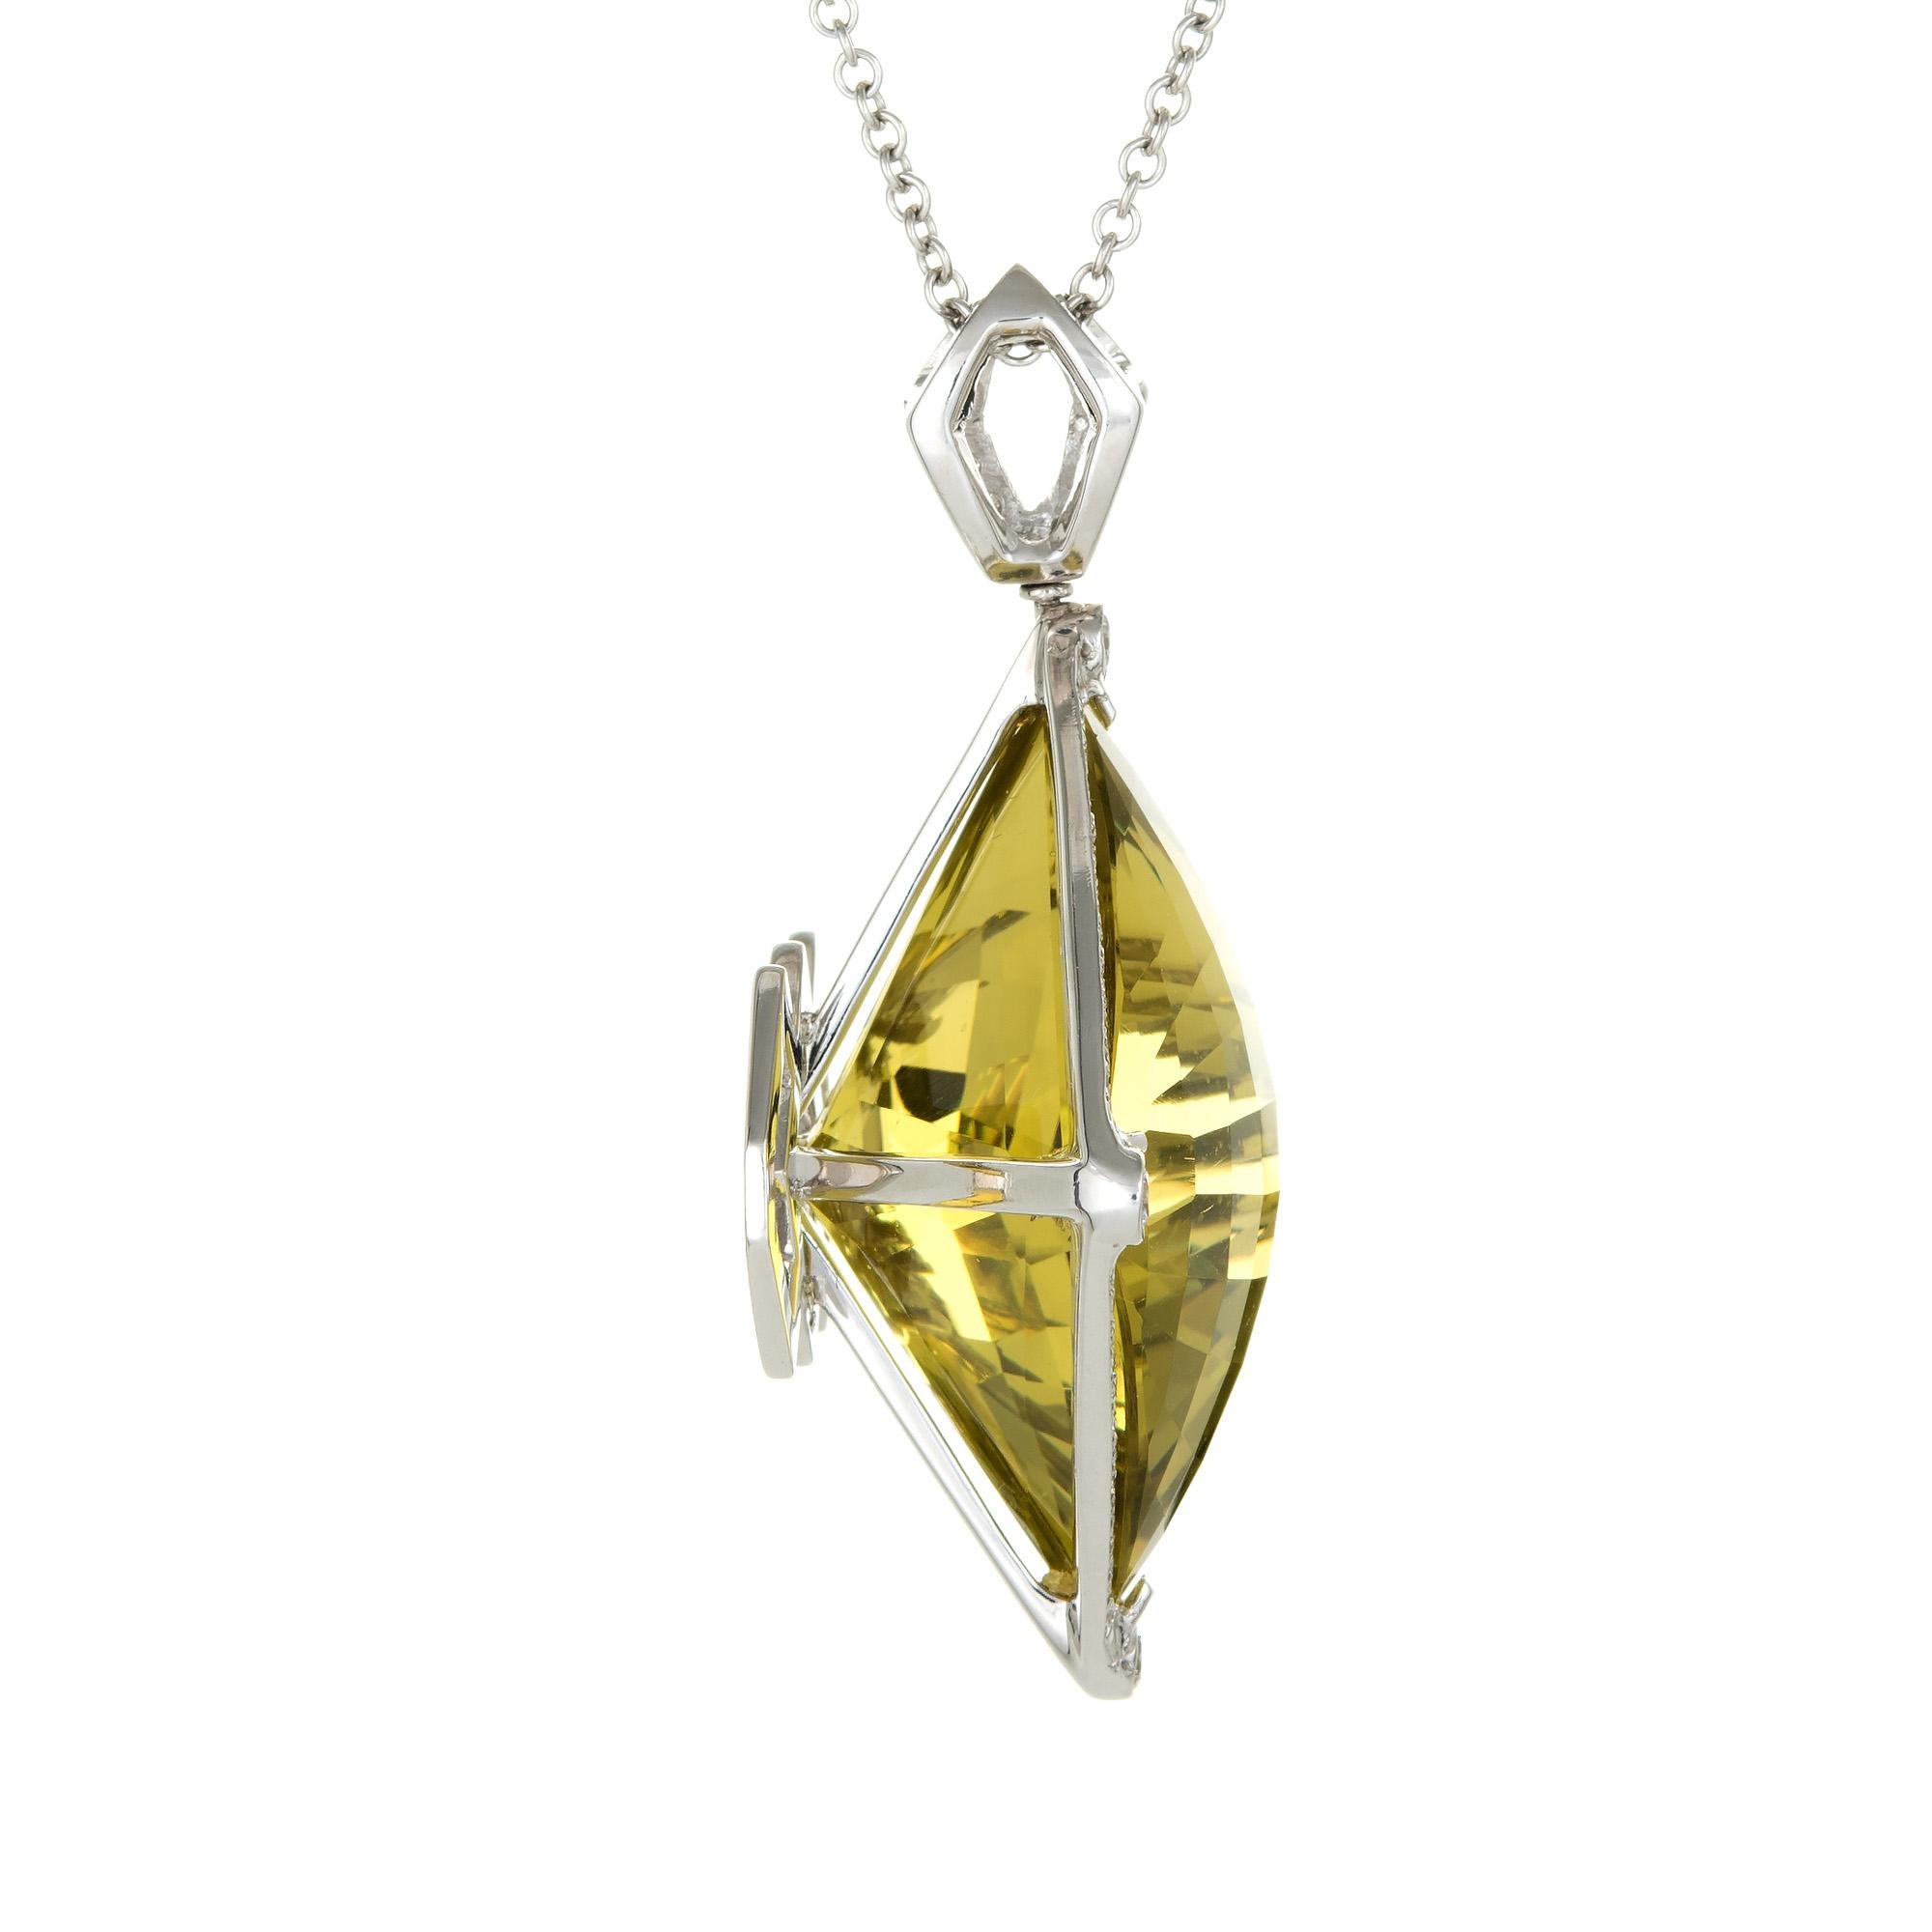 Finely detailed lemon quartz & diamond pendant + necklace crafted in 14 karat white gold.

Large checkerboard faceted lemon quartz measures 29mm x 29mm (estimated at 96 carats), accented with an estimated 1.74 carats of round brilliant cut diamonds